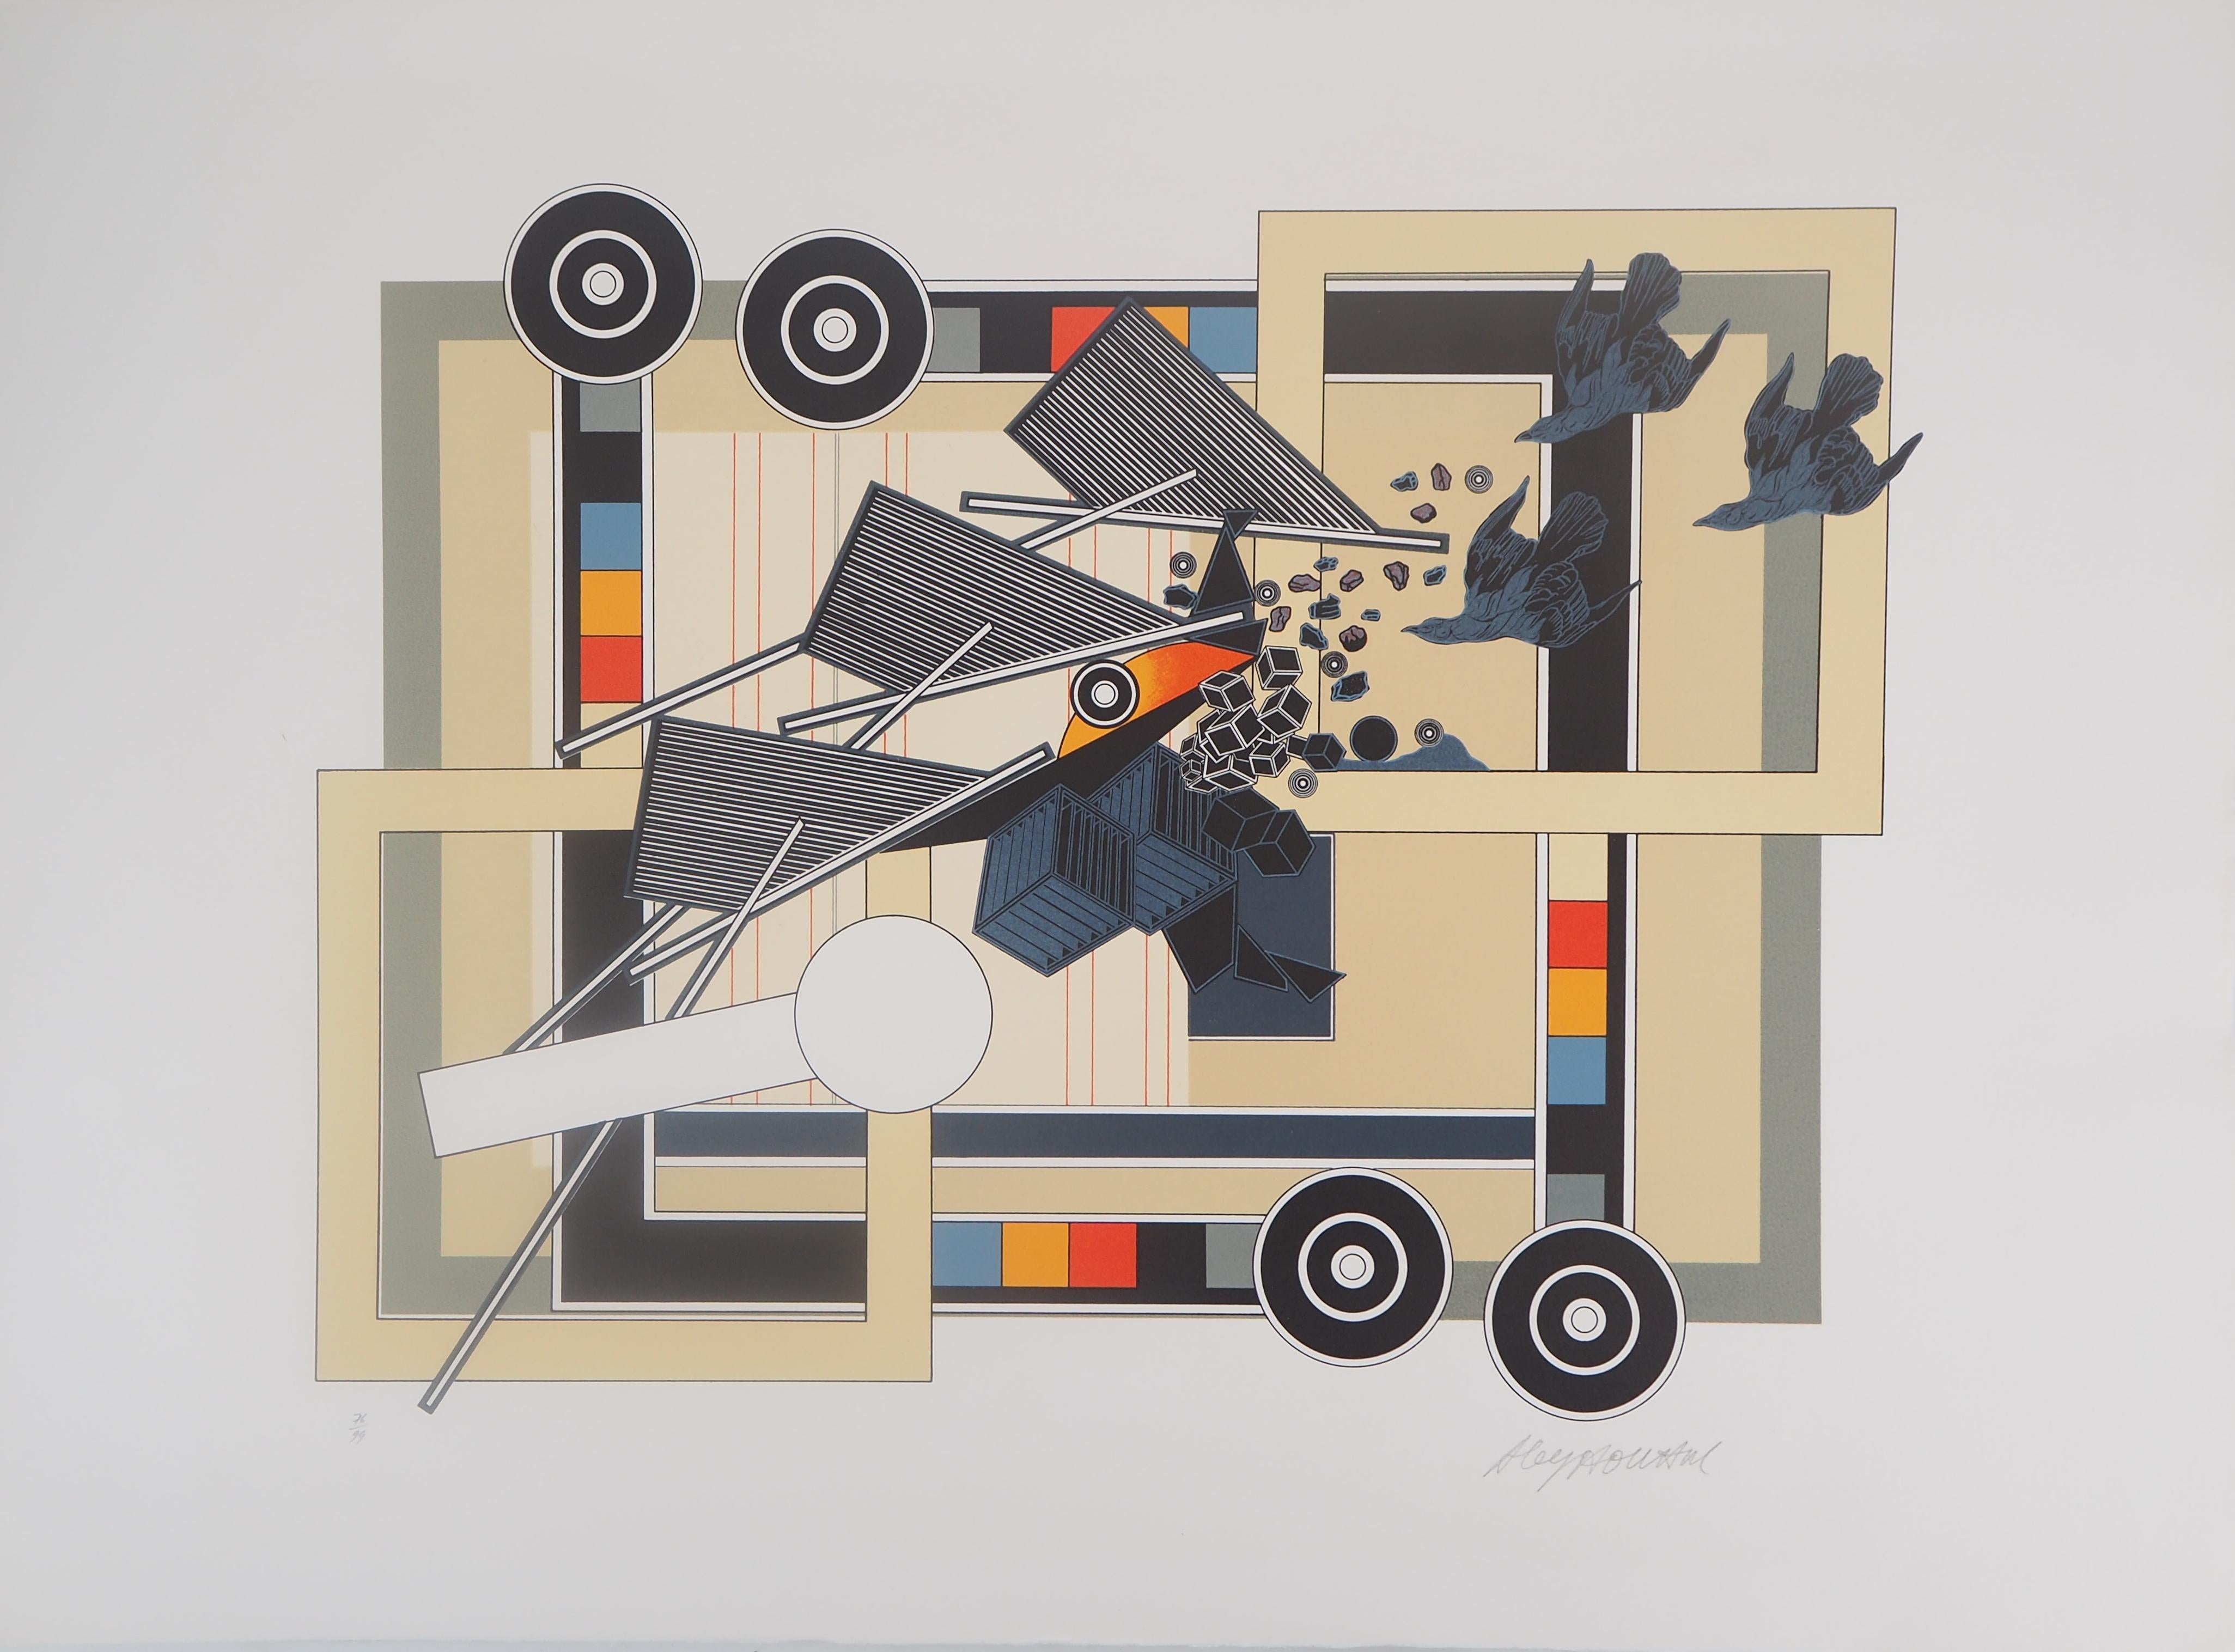 Tandem : Cinetic Compositon with Birds - Handsigned Original Lithograph